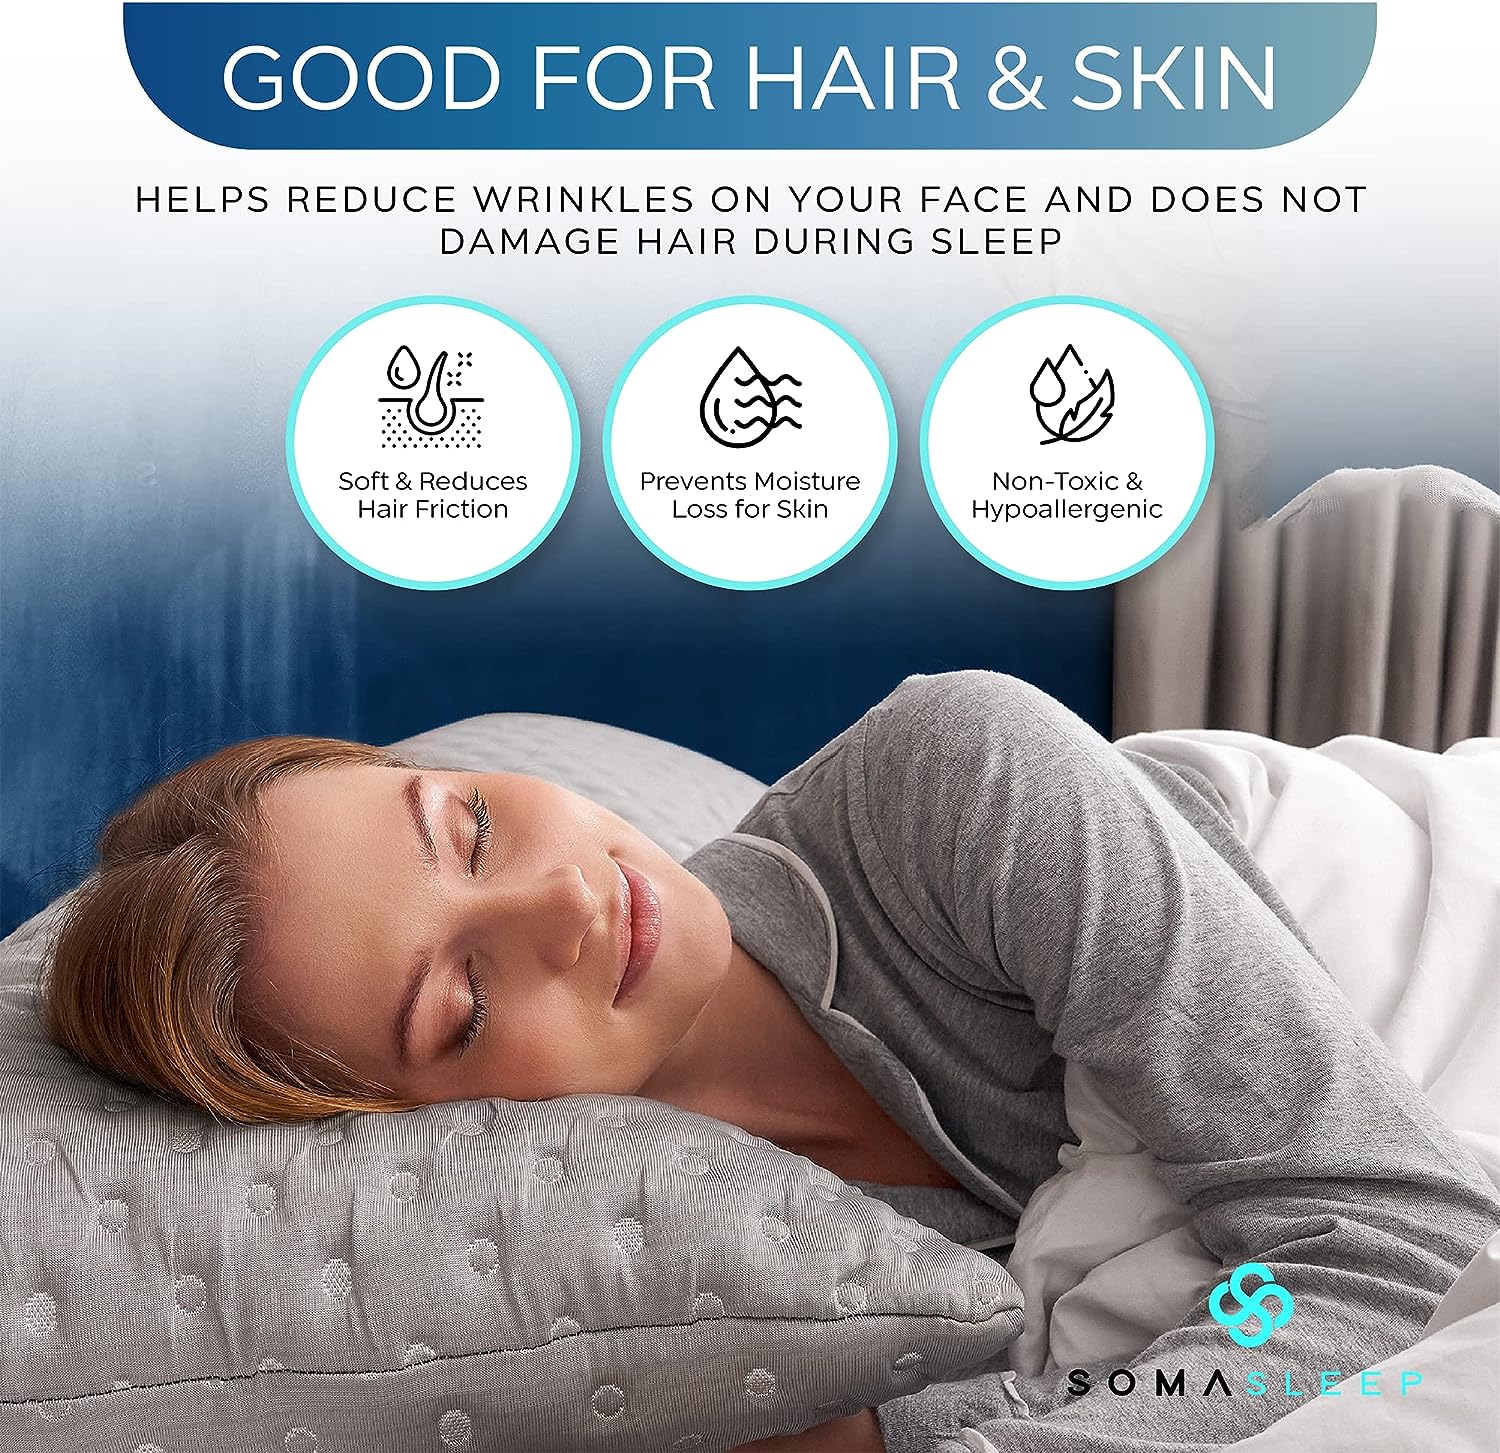 https://bigbigmart.com/wp-content/uploads/2023/08/Cooling-Pillow-for-Hot-Sleepers-Best-Curved-Side-Sleeper-Bed-Pillow-Anti-Wrinkle-Cool-Gel-Pillow-Gel-Cooling-Memory-Foam-Pillow-for-Neck-Back-and-Shoulder-Pain-Relief-and-Sleeping-Queen-Grey4.jpg